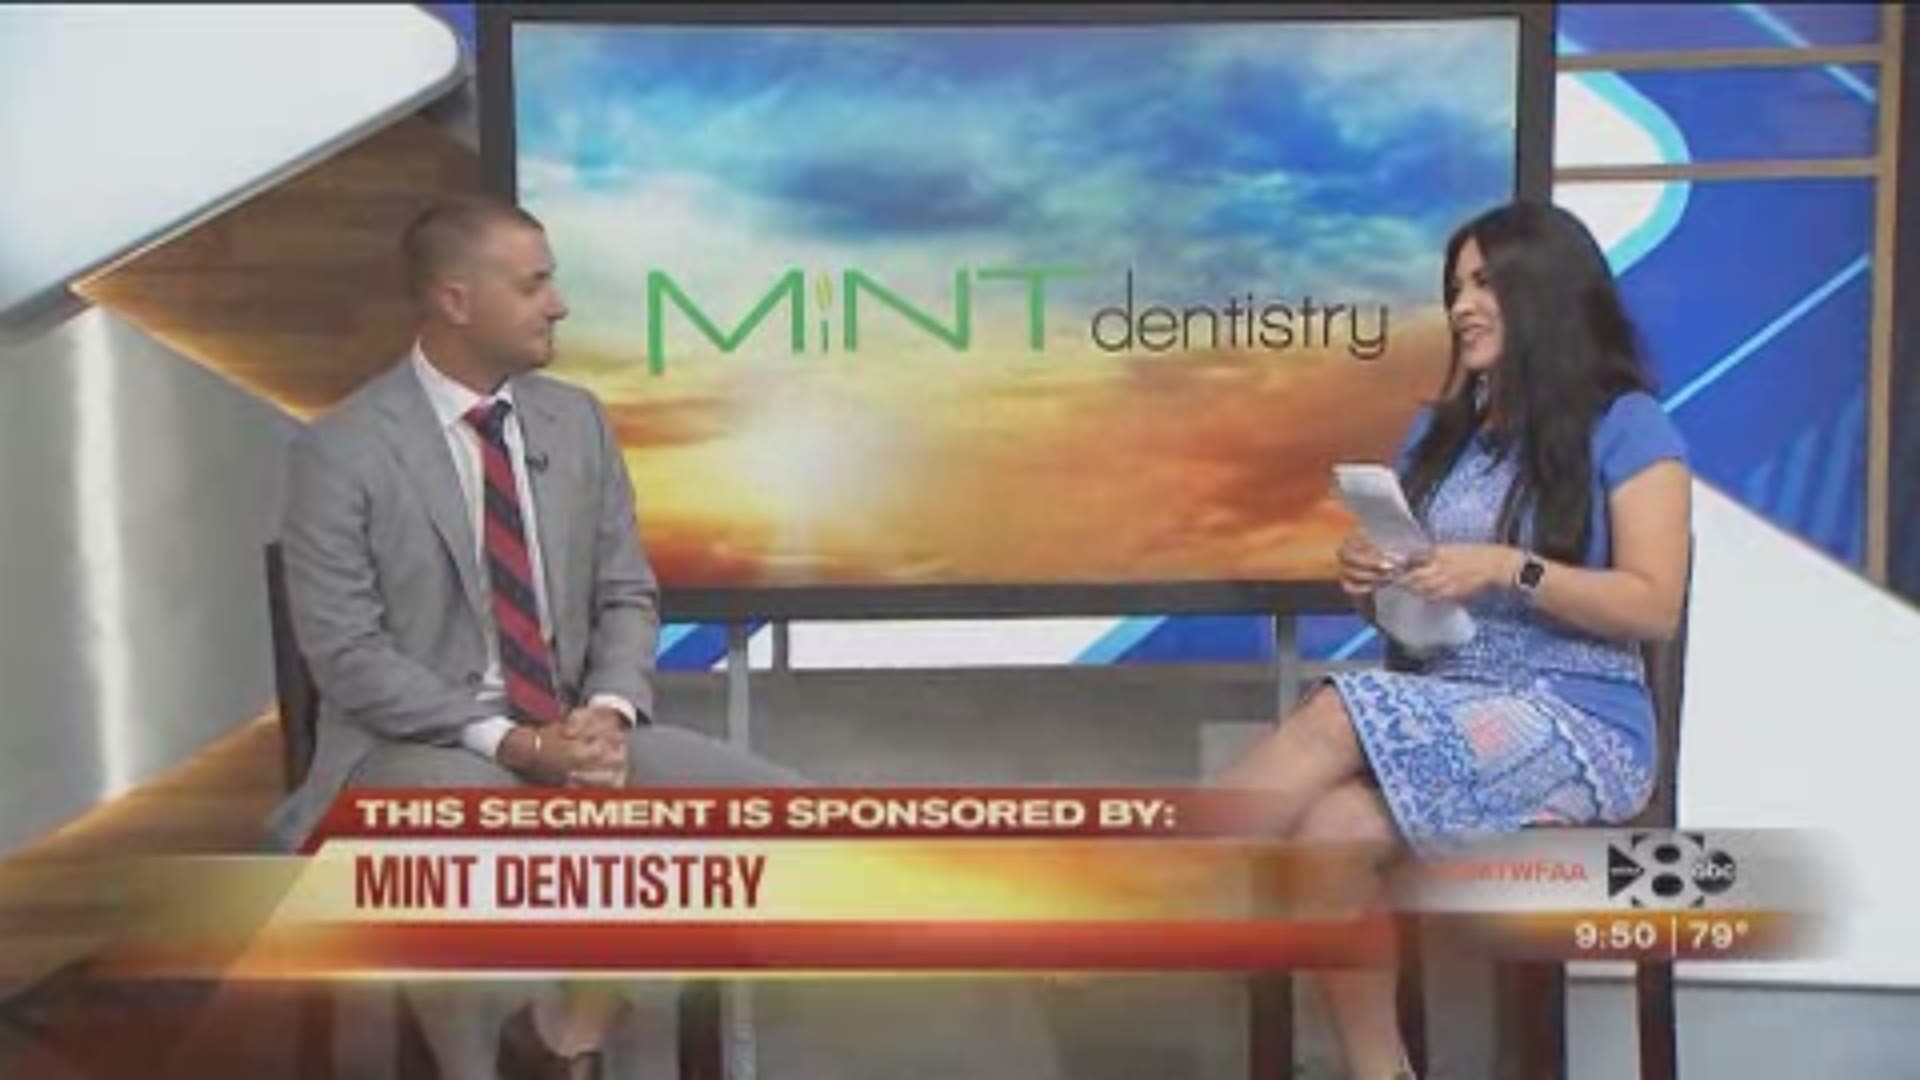 MINT Dentistry Offers Beautiful Teeth. for more information go to mintdentistry.com